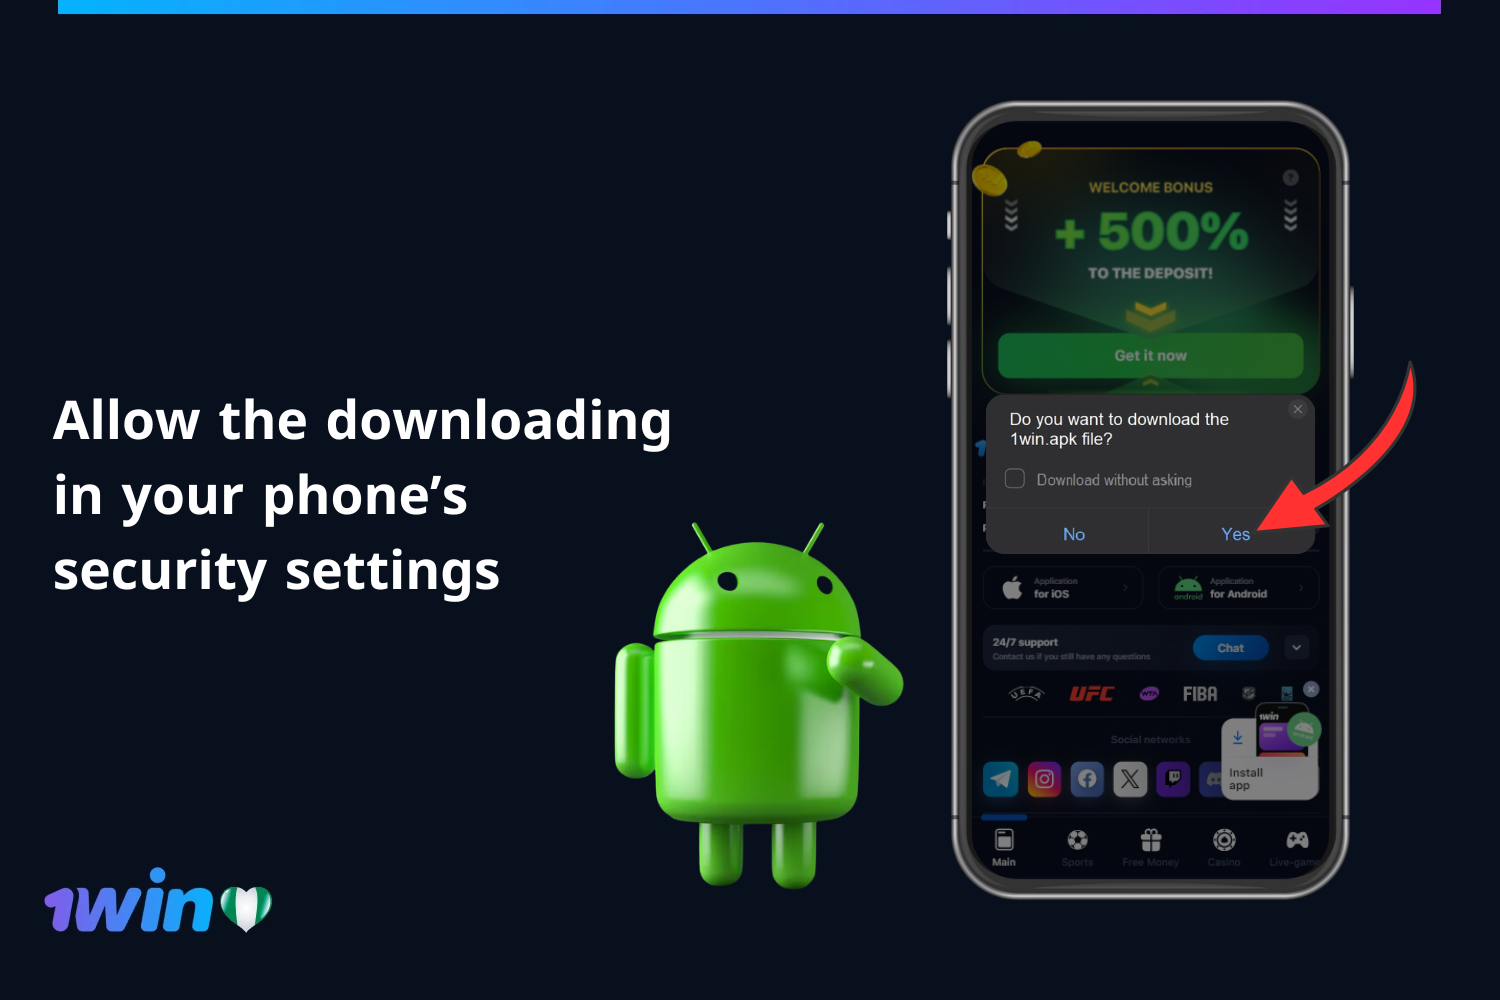 To download the app to an Android device, a user from Nigeria should allow the download in the pop-up window